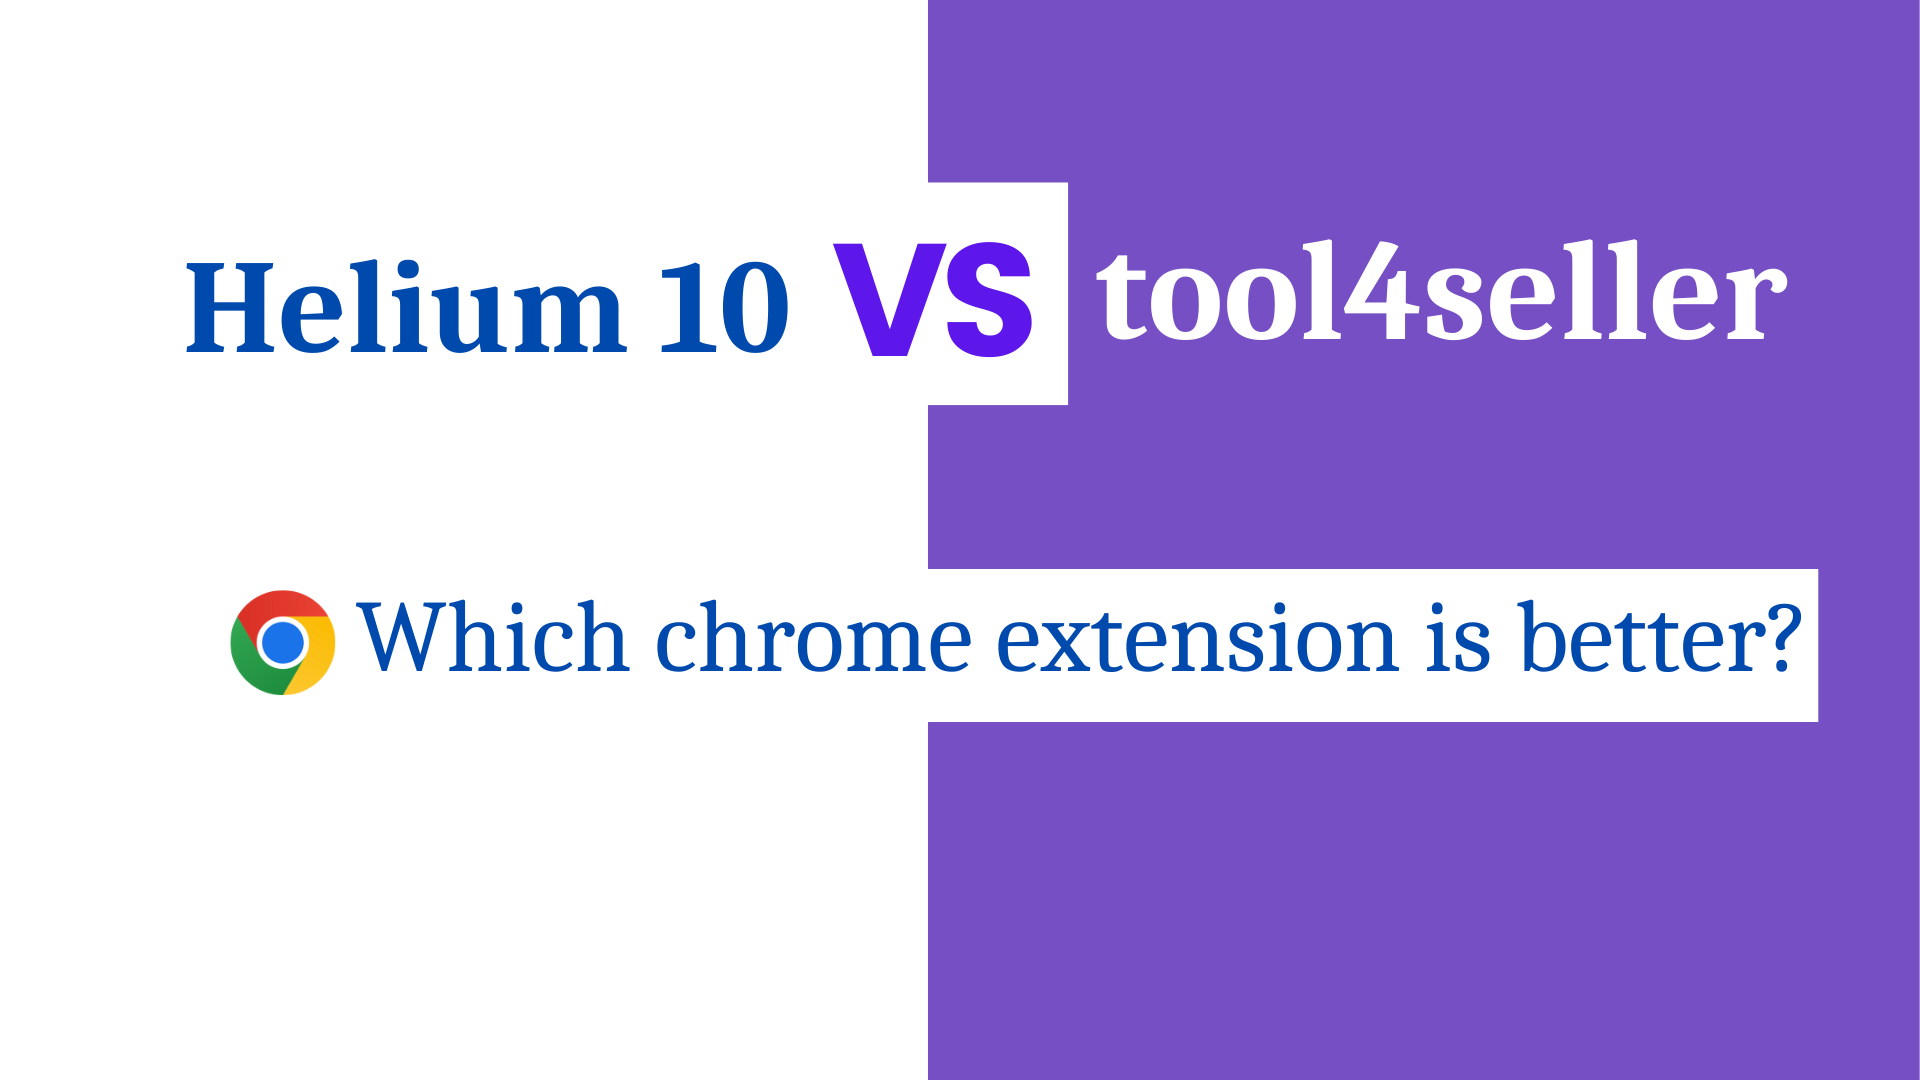 Helium 10 VS Tool4seller: Which chrome extension is better?